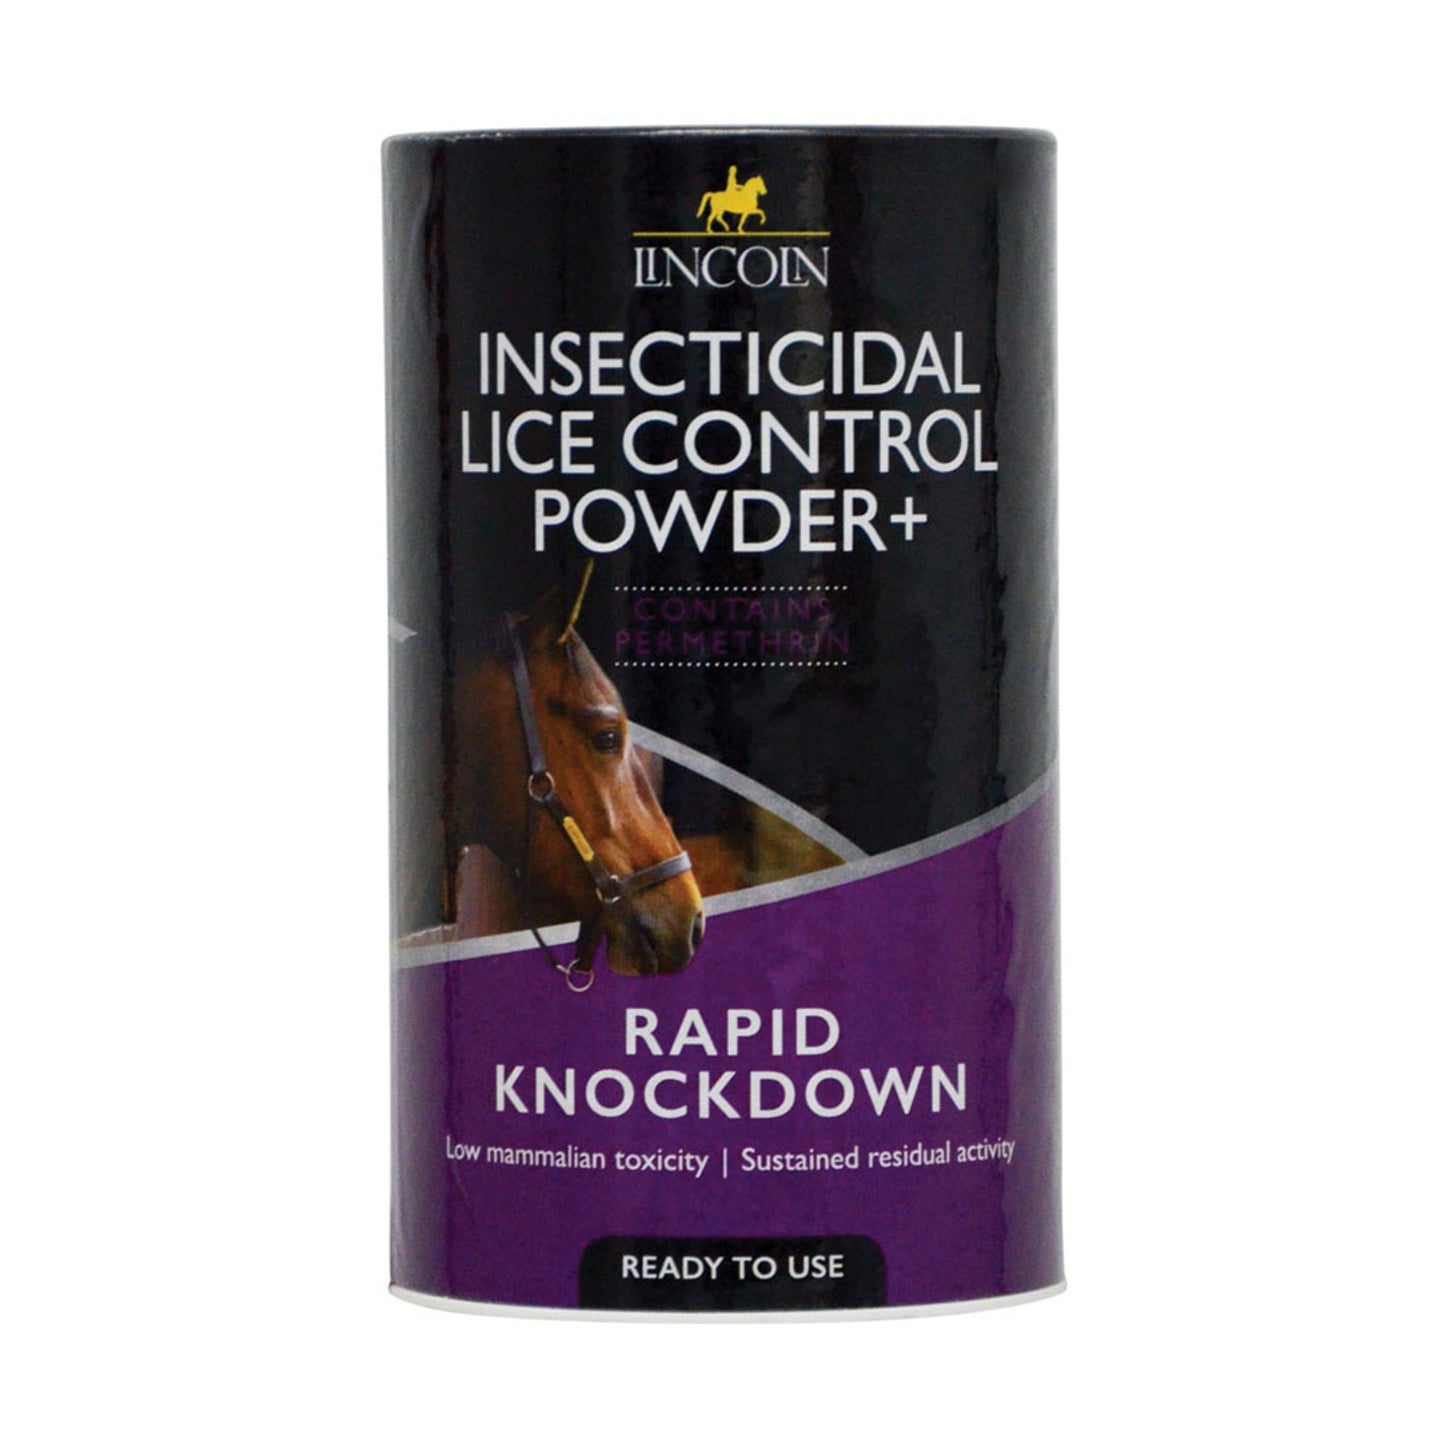 Lincoln Insecticidal Lice Control Powder+ 750g